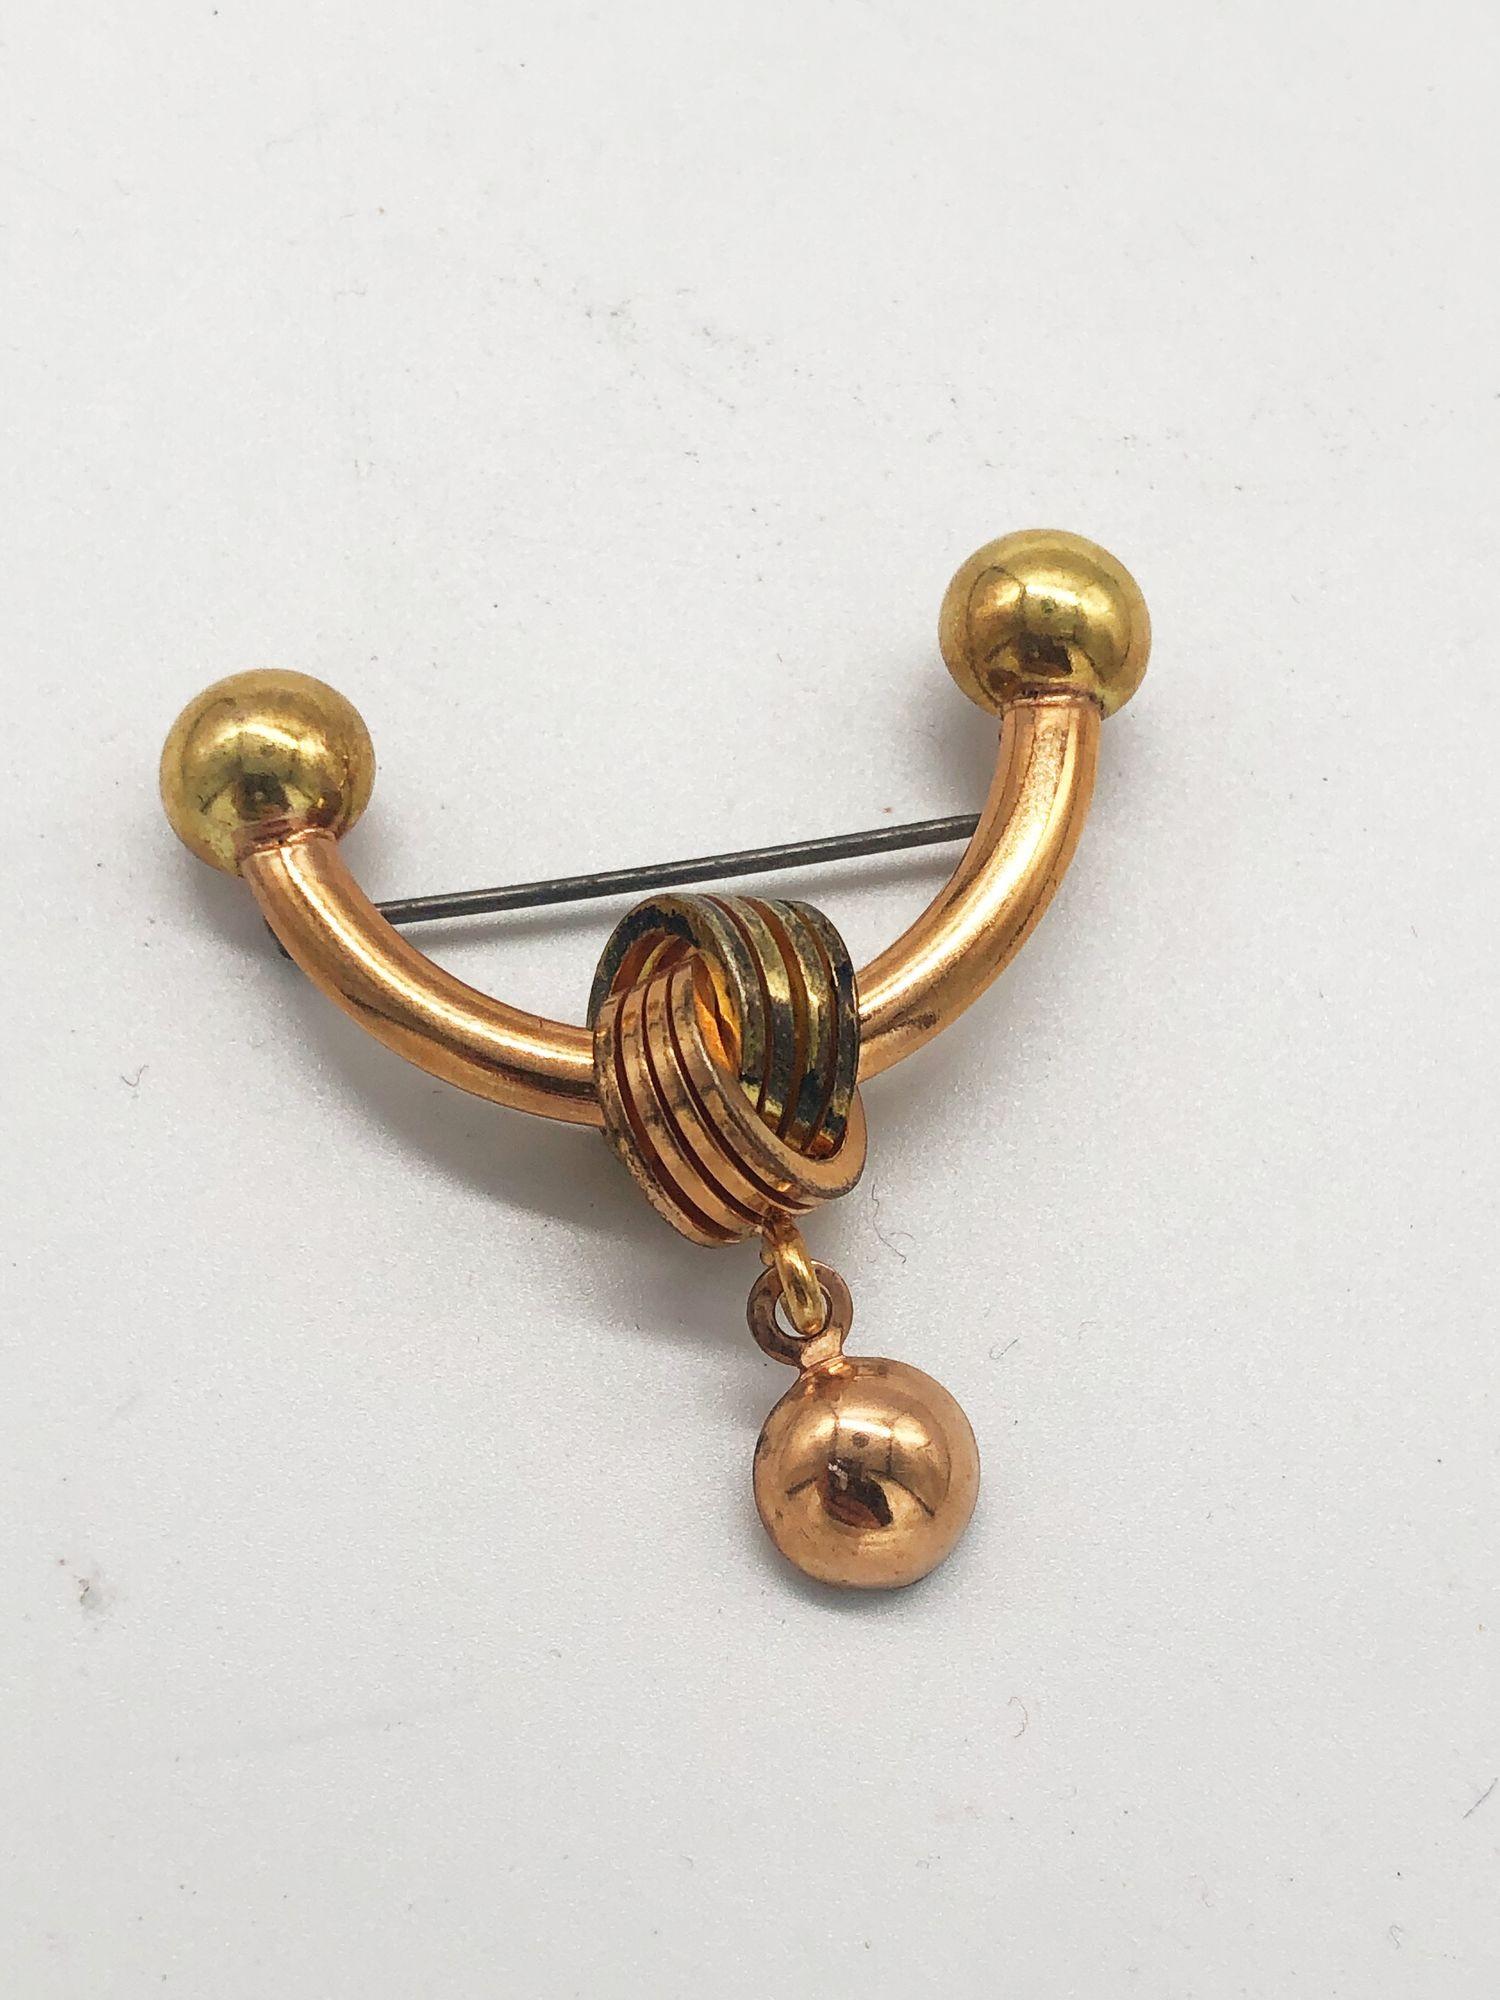 Never used set of three midcentury rosegold plated brooch pins, untouched and vintage. These elegant accessories exude timeless charm and sophistication. A rare find for collectors or those seeking classic, unused adornments with a touch of